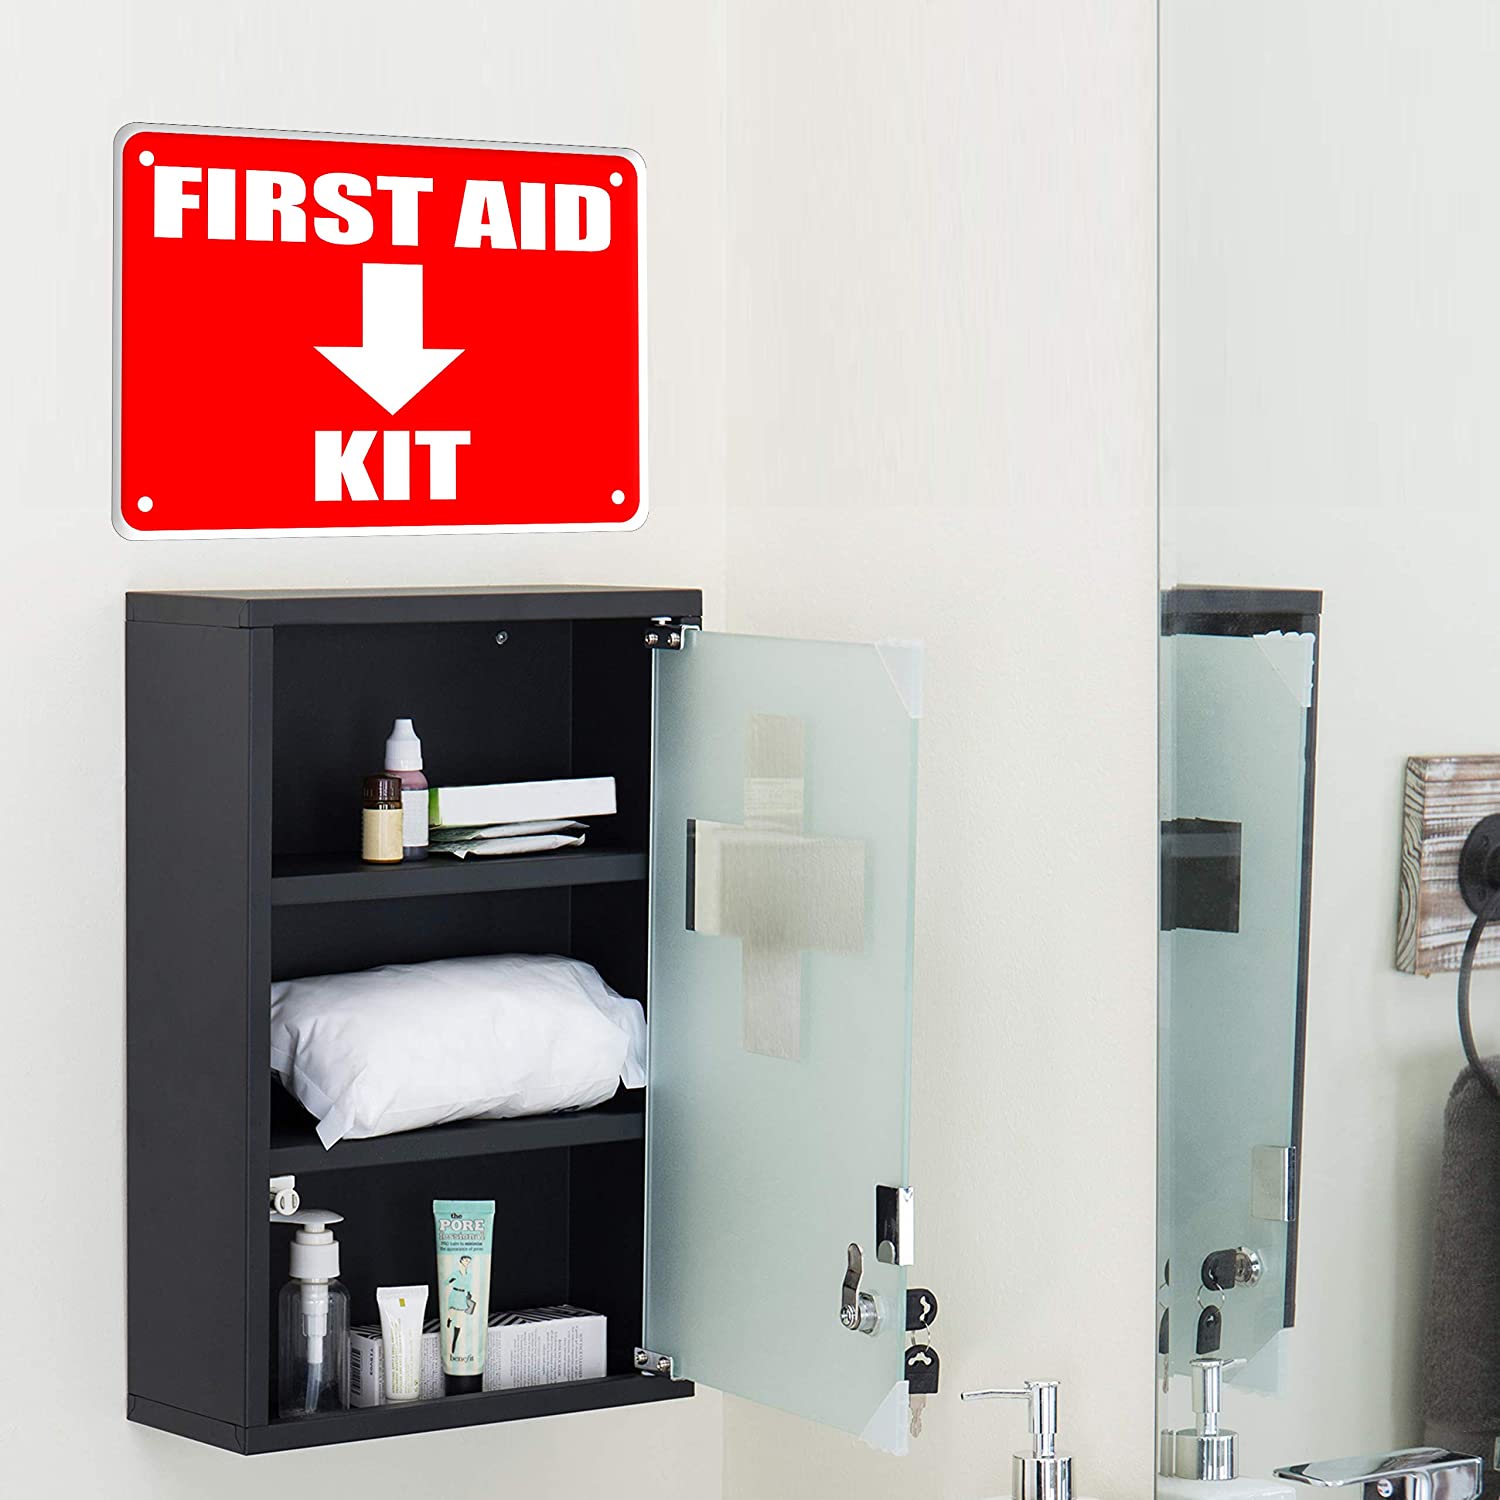 First Aid Kit Sign, Durable Plastic Safety Sign, 7 x 10 Inch, Red on White, for Indoor/Outdoor Use